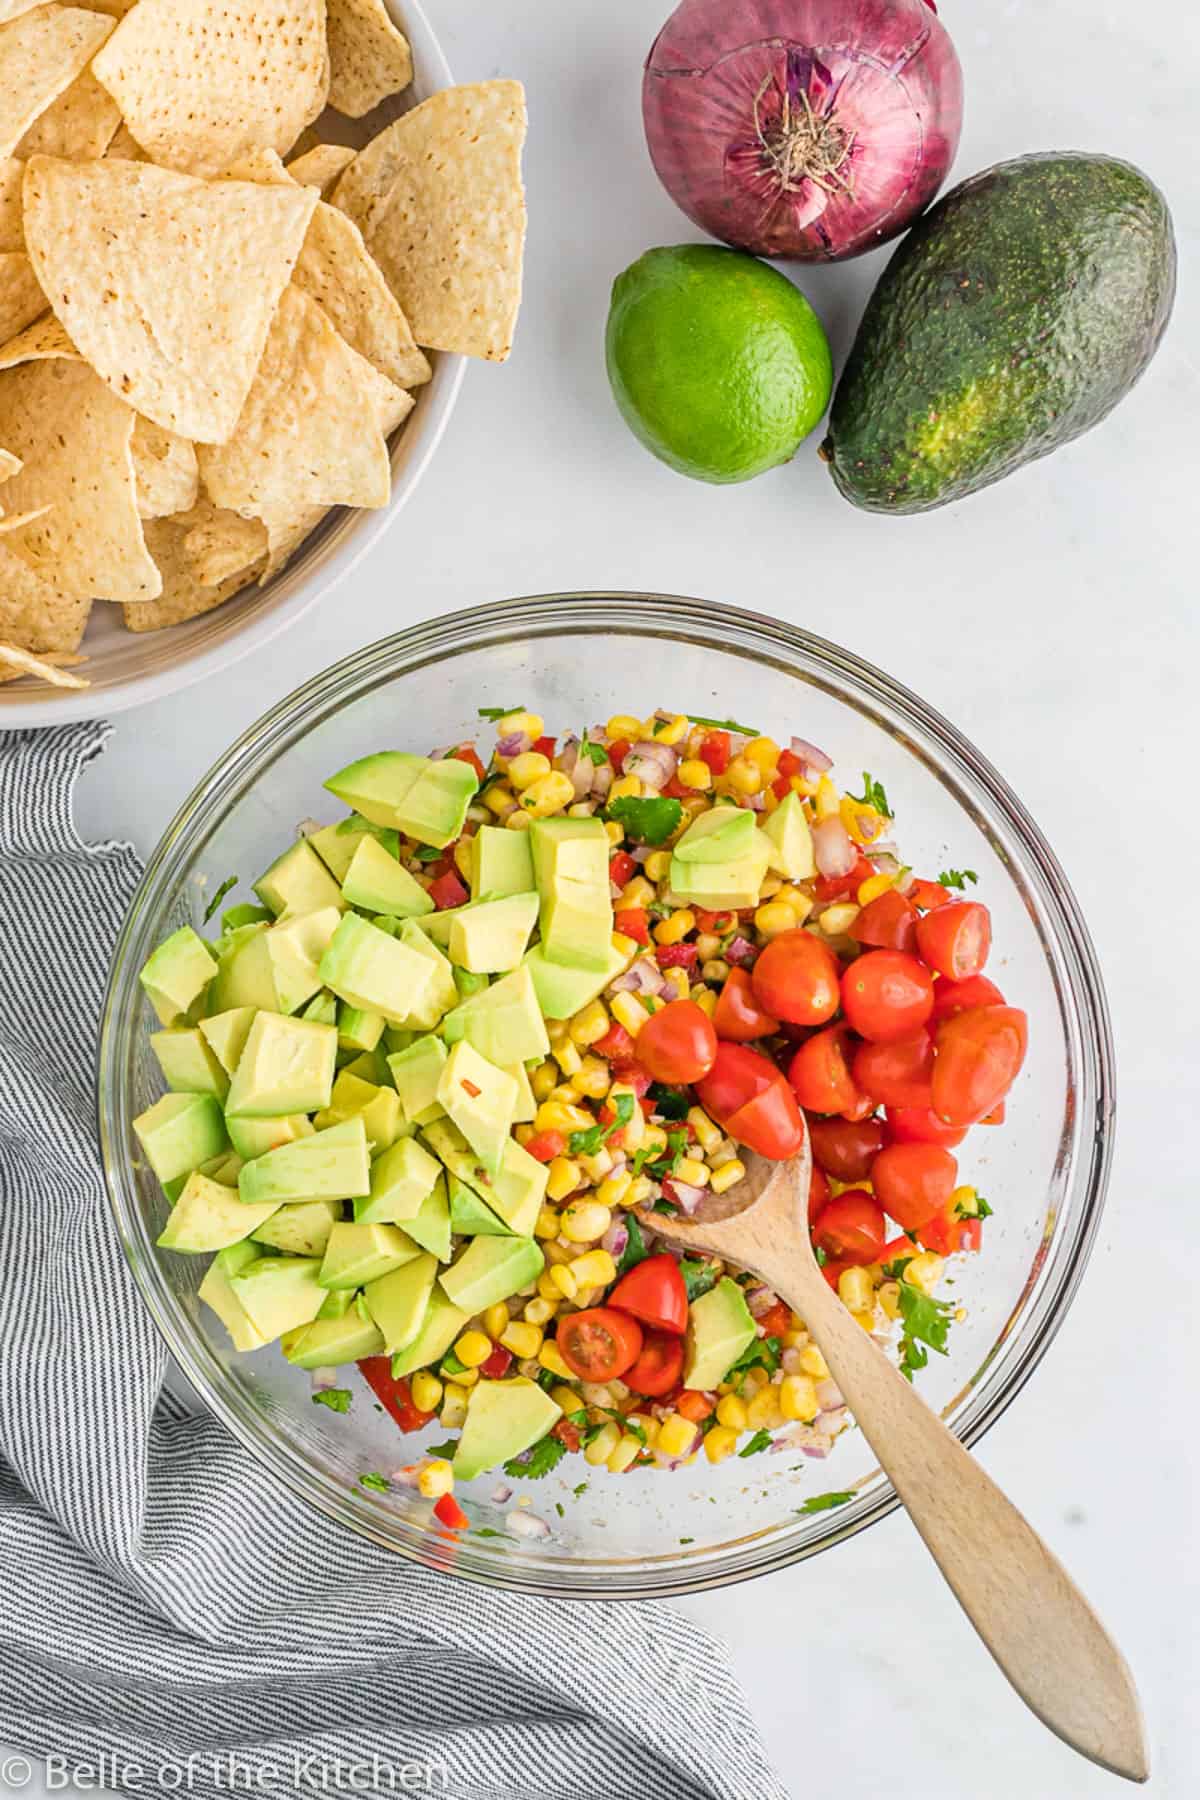 a wooden spoon mixing corn, avocado, and tomatoes